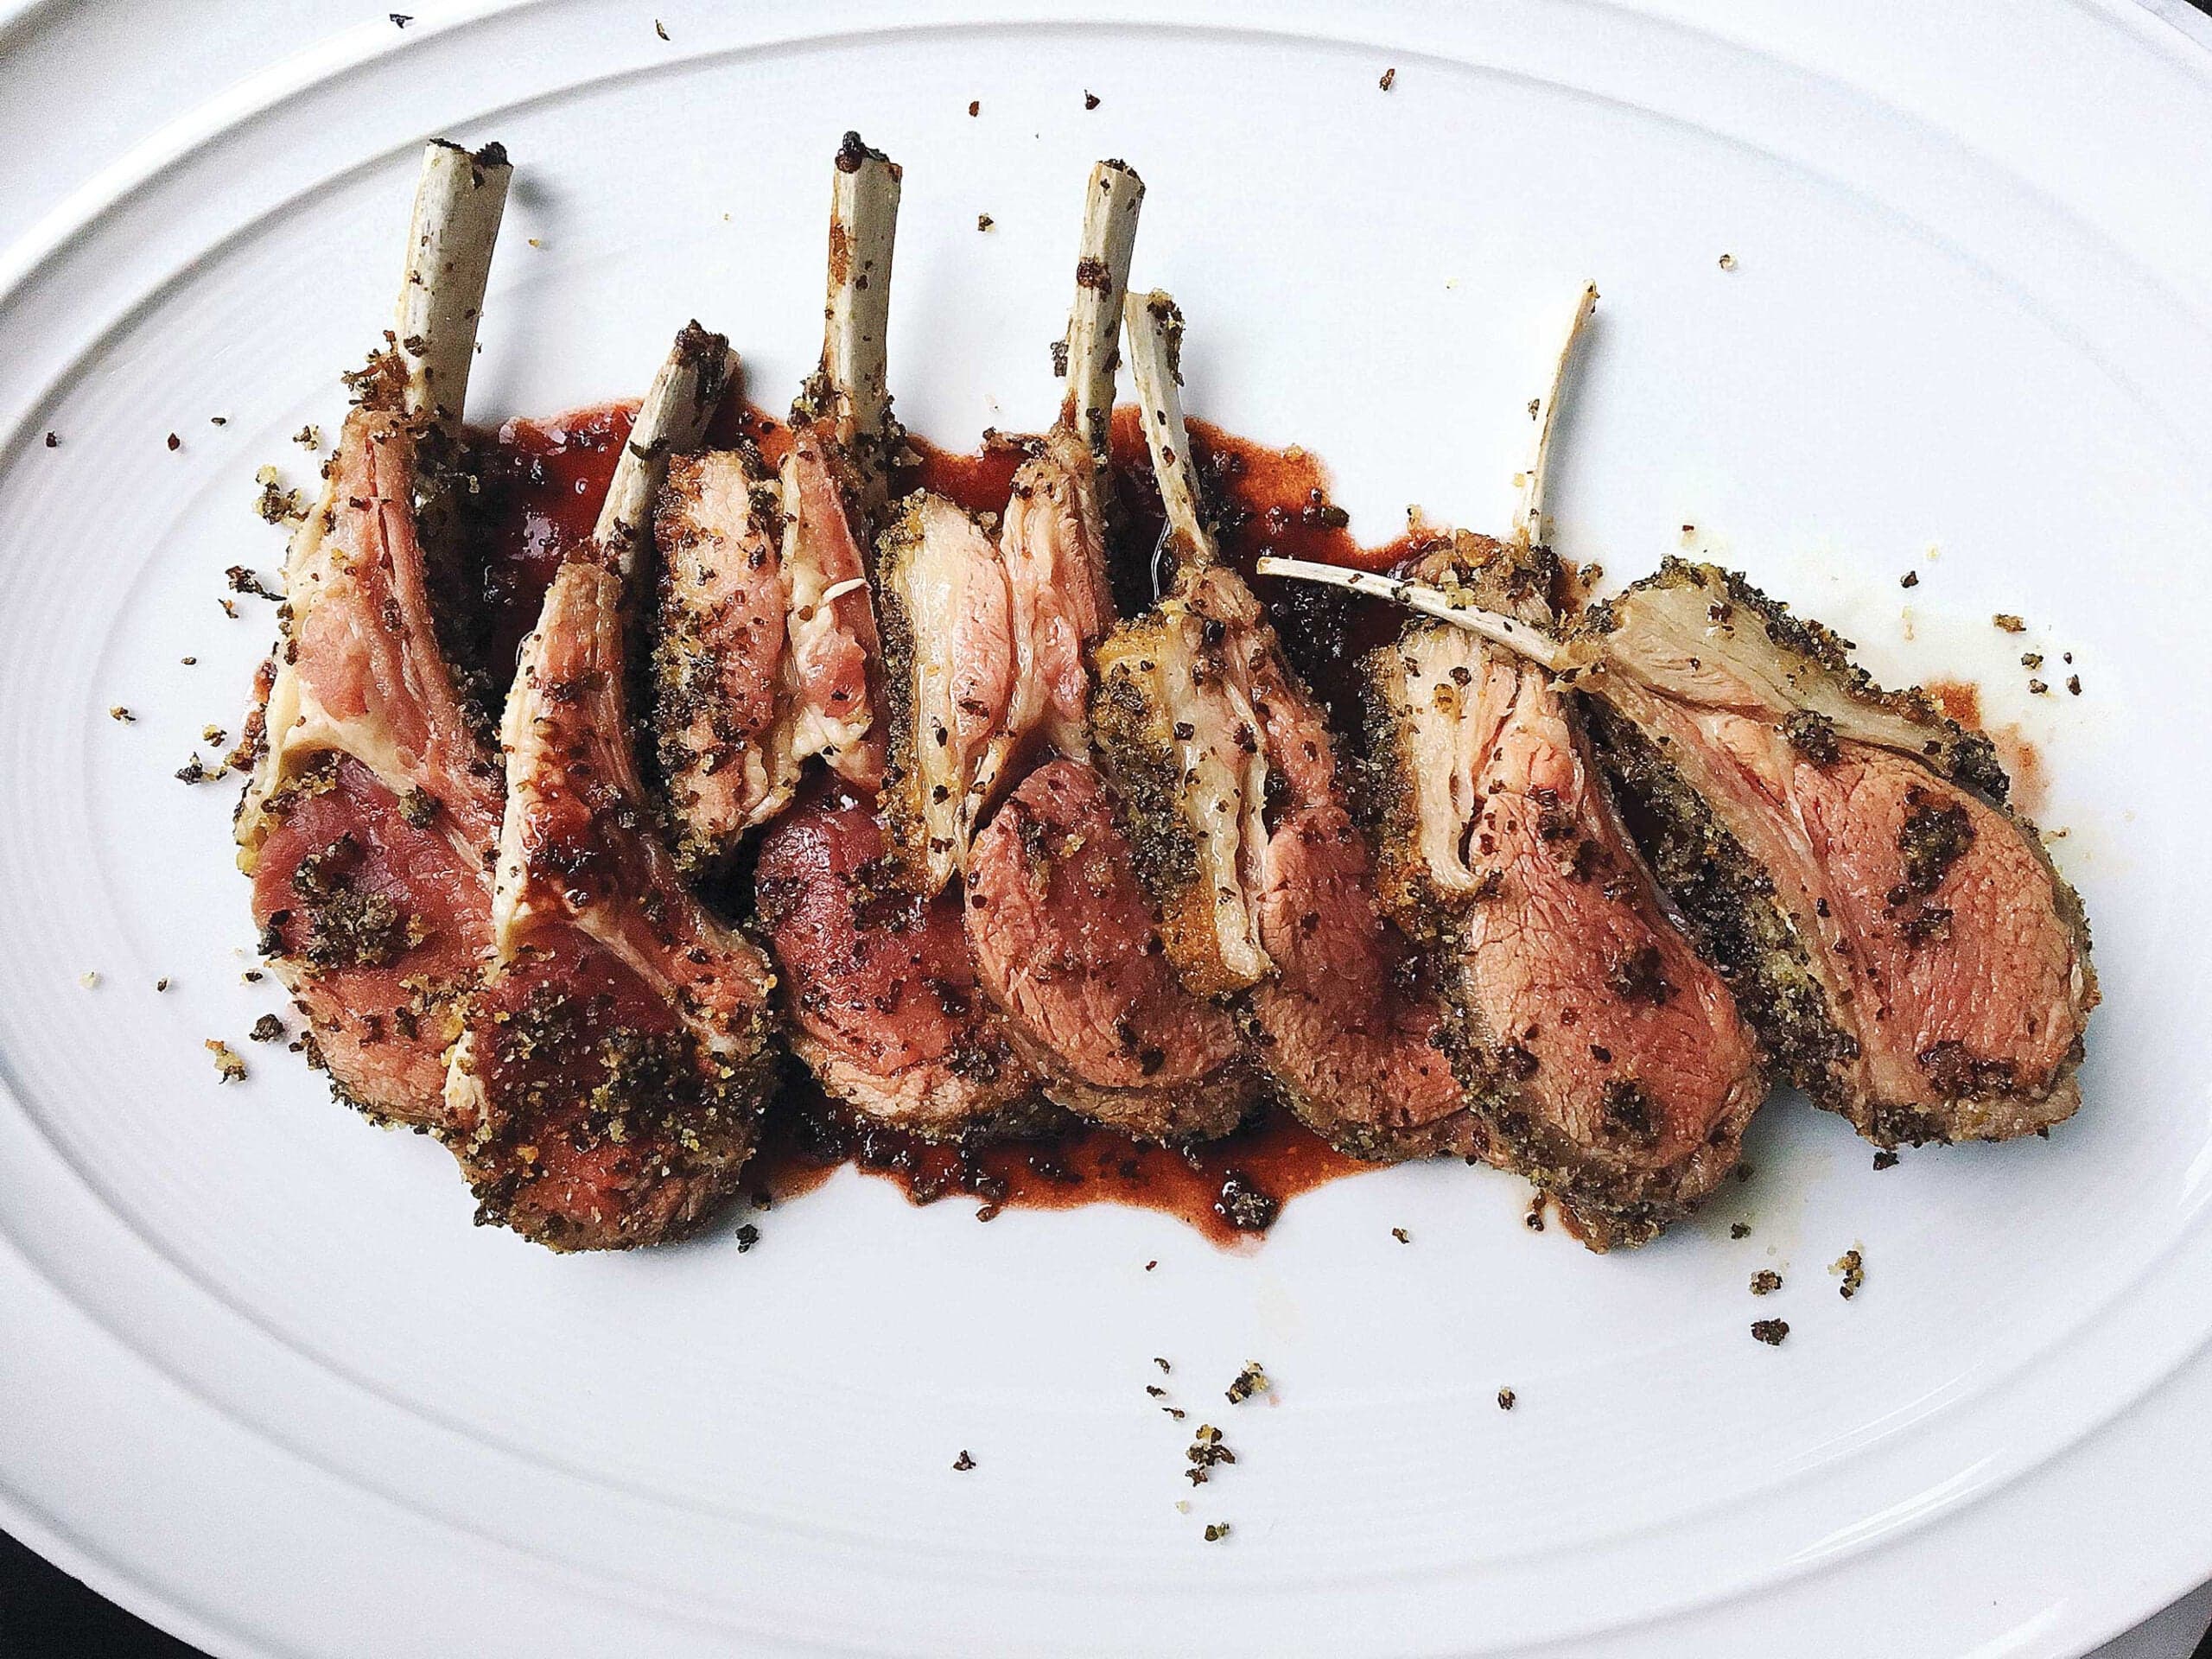 Seaweed-Crusted Rack of Lamb with Red Wine Sauce